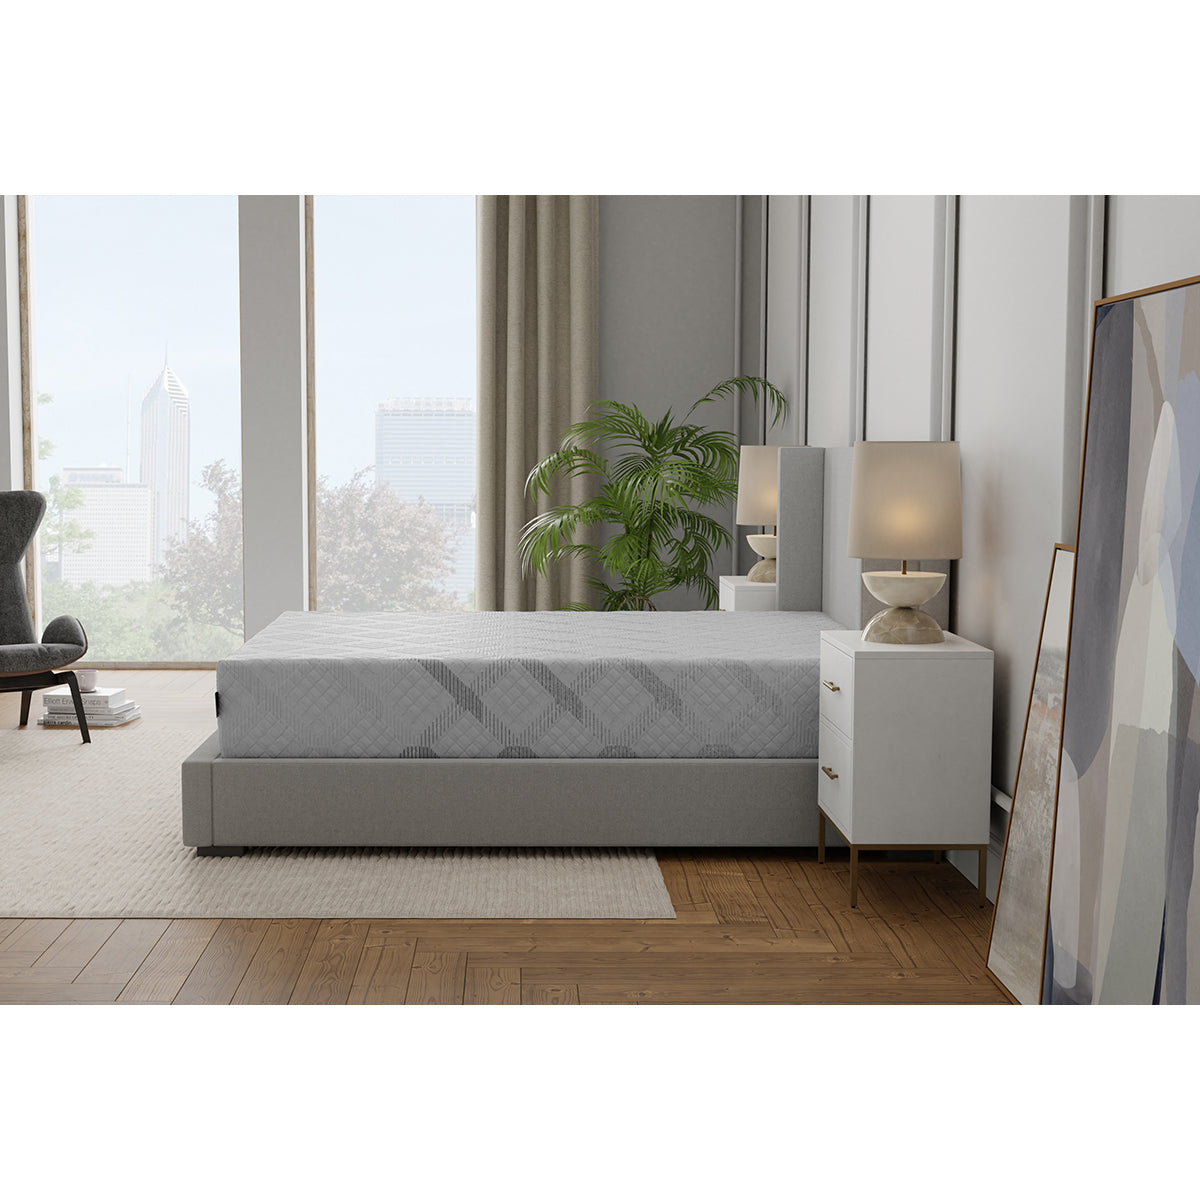 SmartLife Calla Plush Mattress On Bed Frame In Bedroom Side View